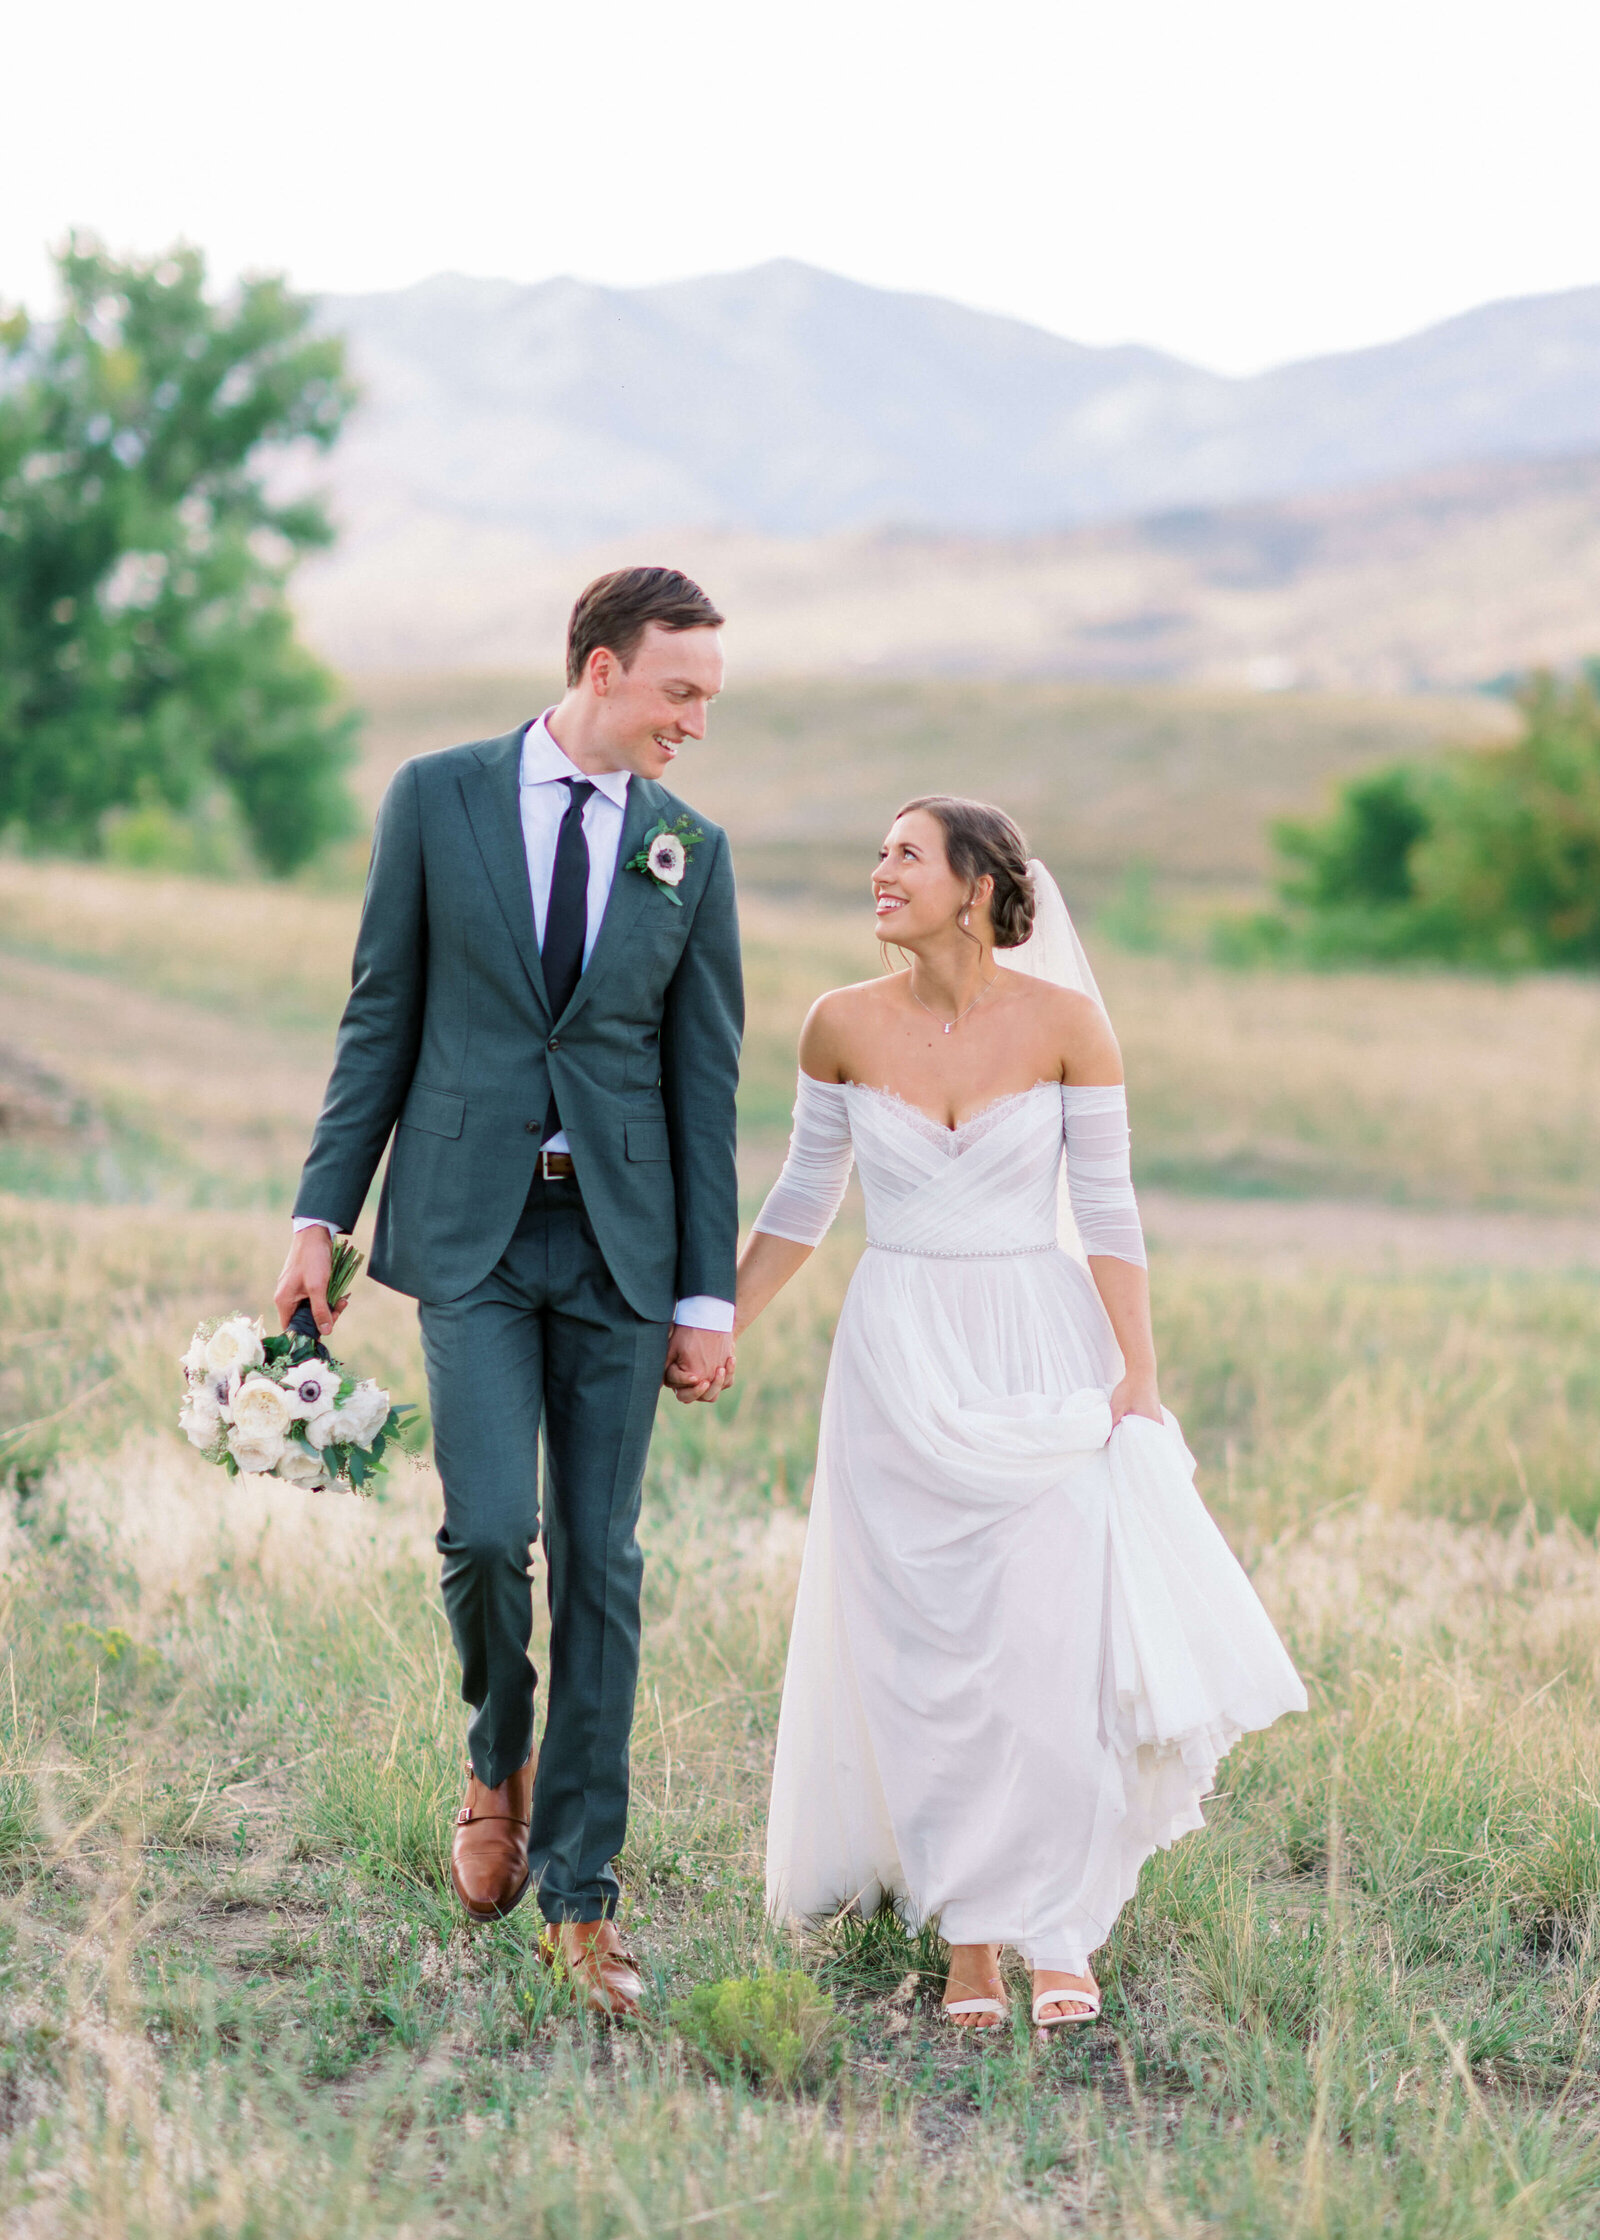 groom in green suit and bride in dress walking through a field with the mountains in the background